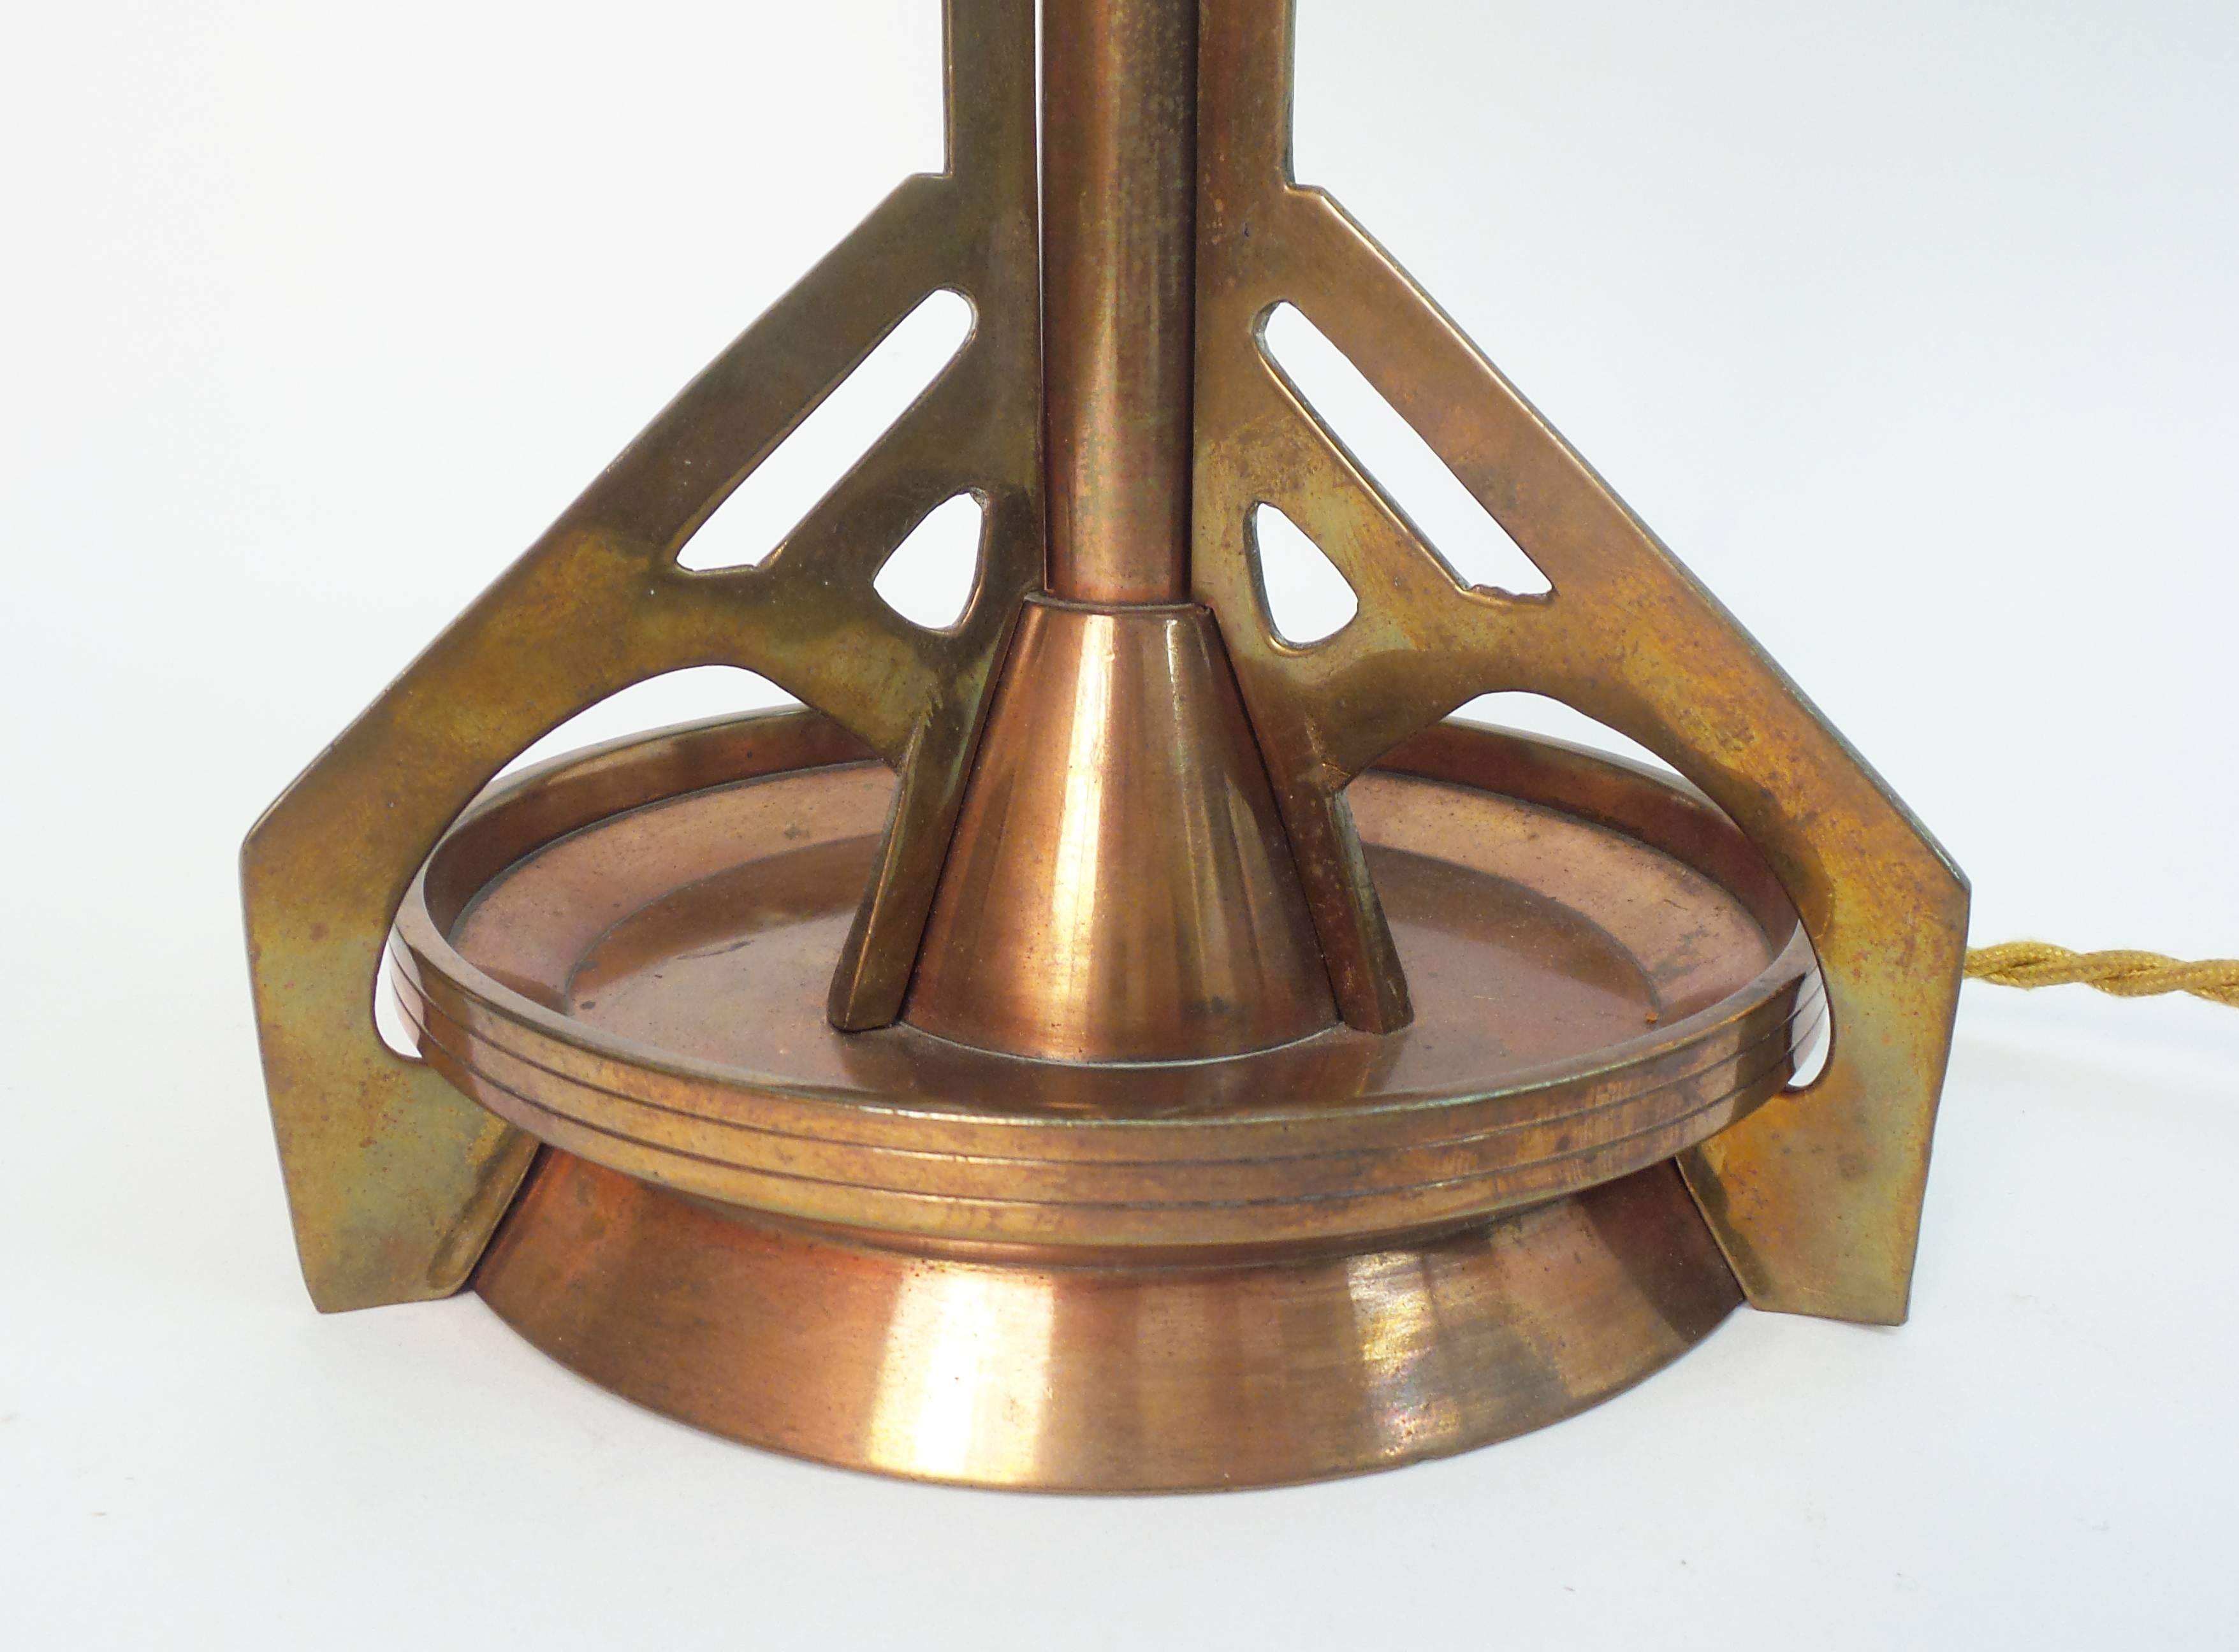 A Jugendstil period table lamp of unusual design executed in brass and copper, the frosted glass shade resting in a pierced brass frame lined in silk.